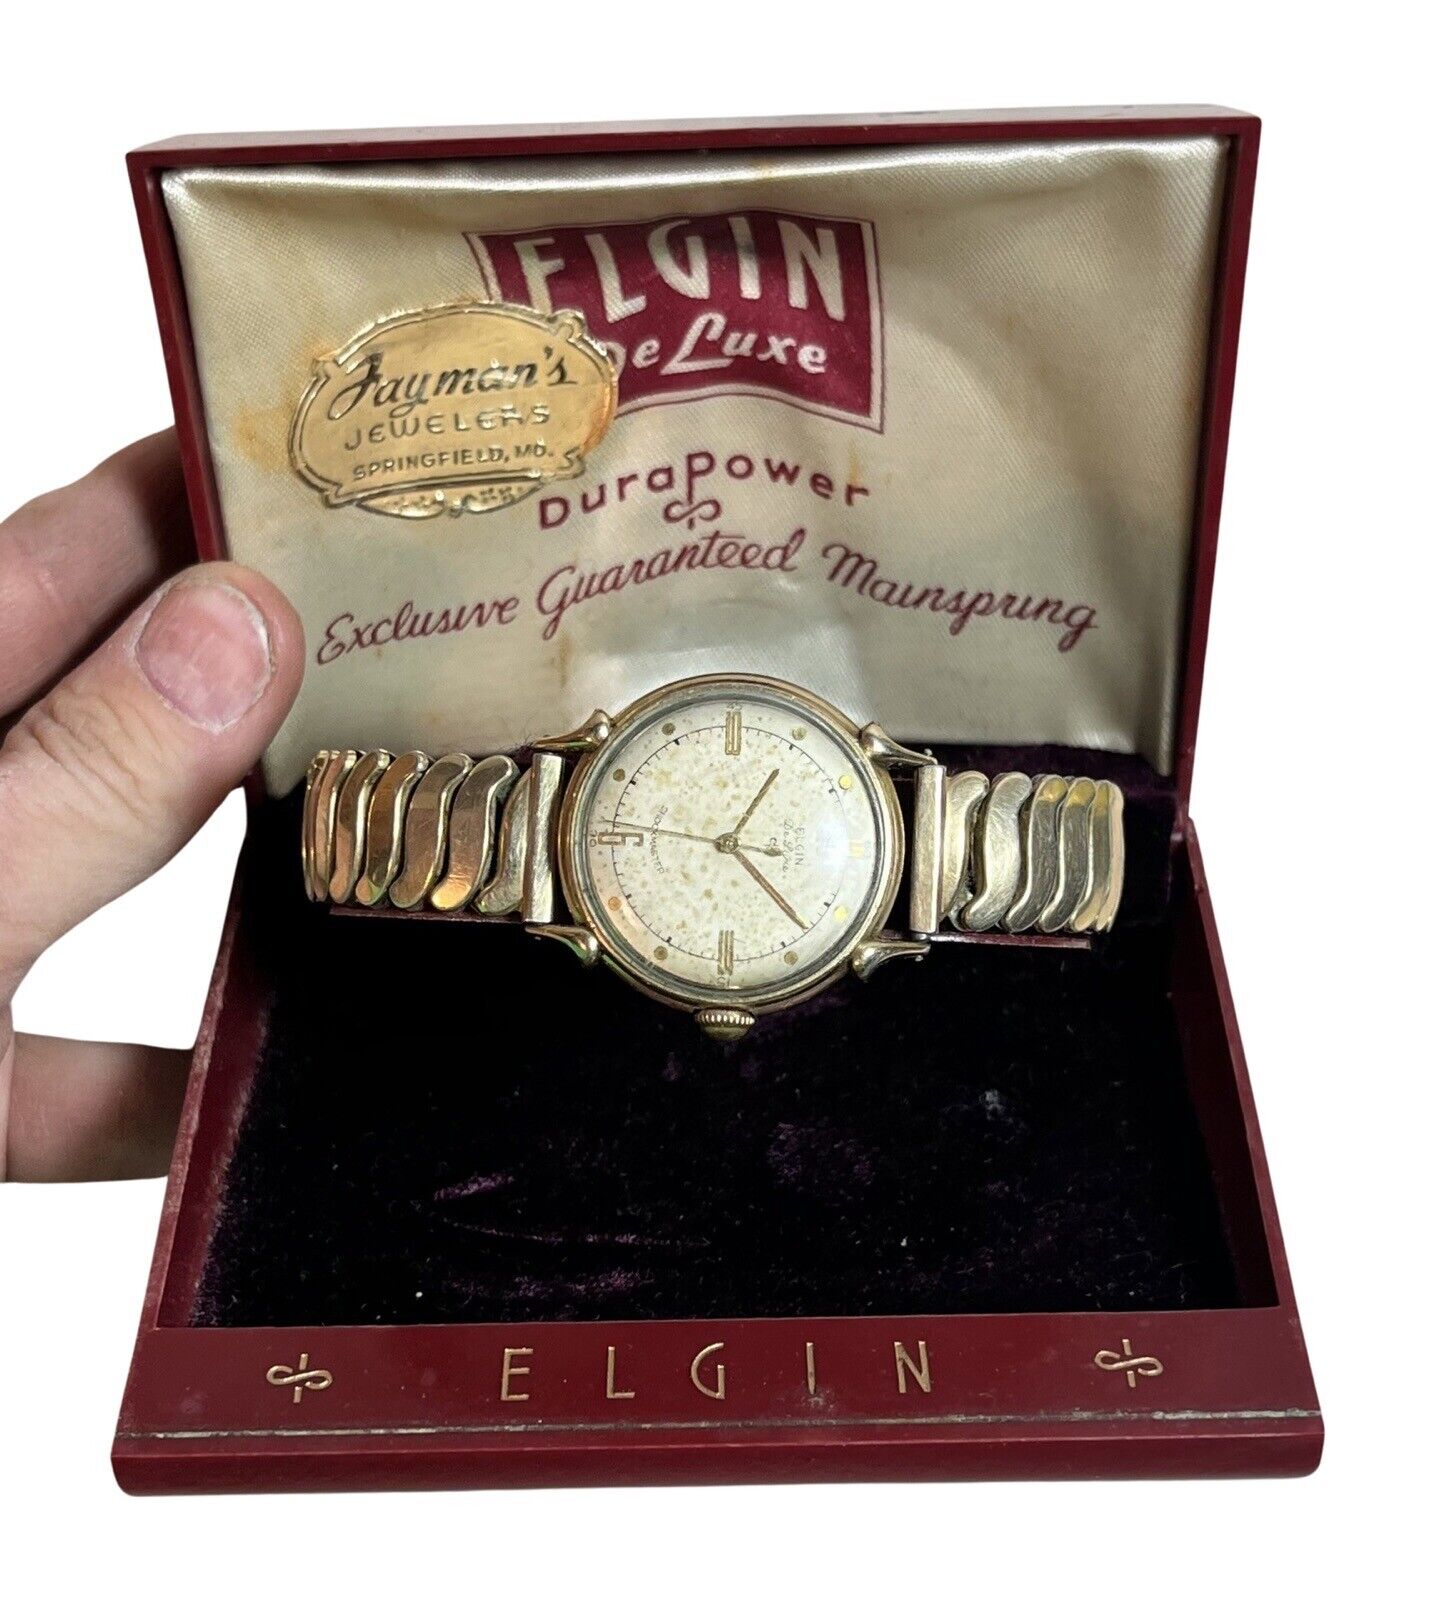 1960s Elgin Durapower 14k Gold Filled Automatic Watch WITH ORIGINAL BOX WORKS